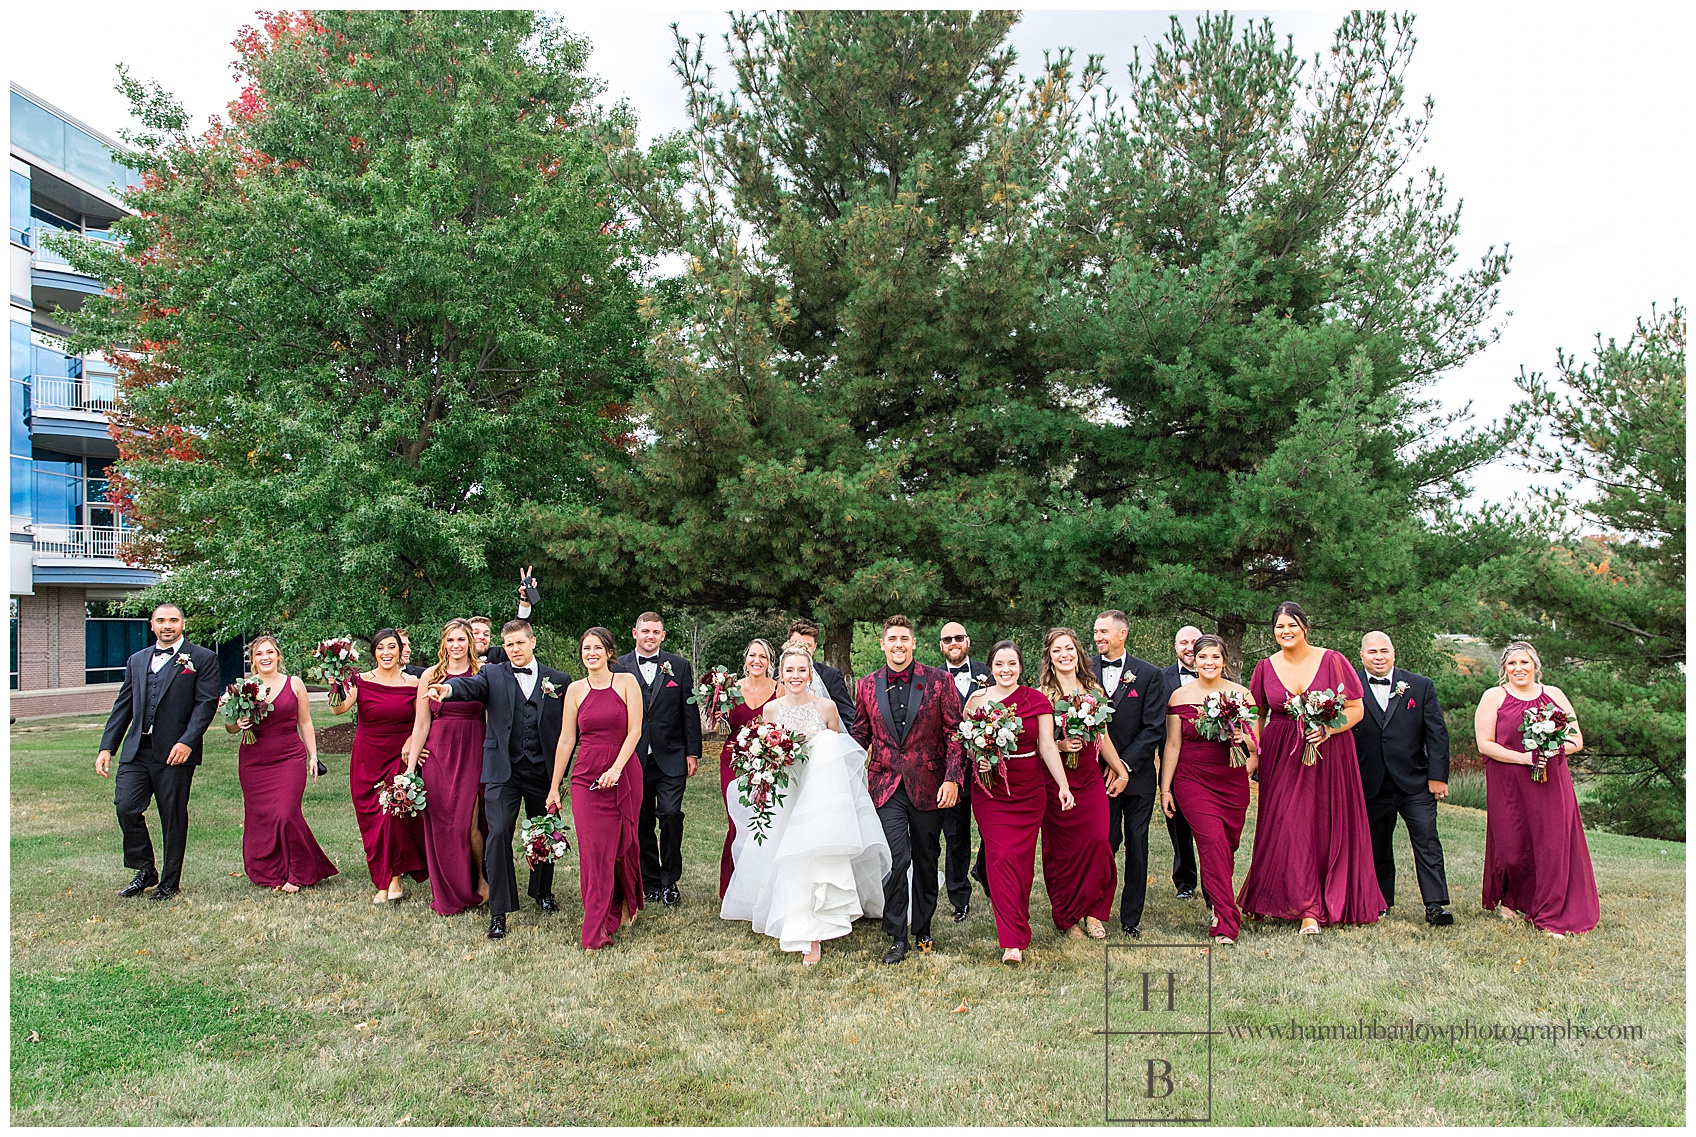 Large Bridal Party Walking in Canonsburg, PA